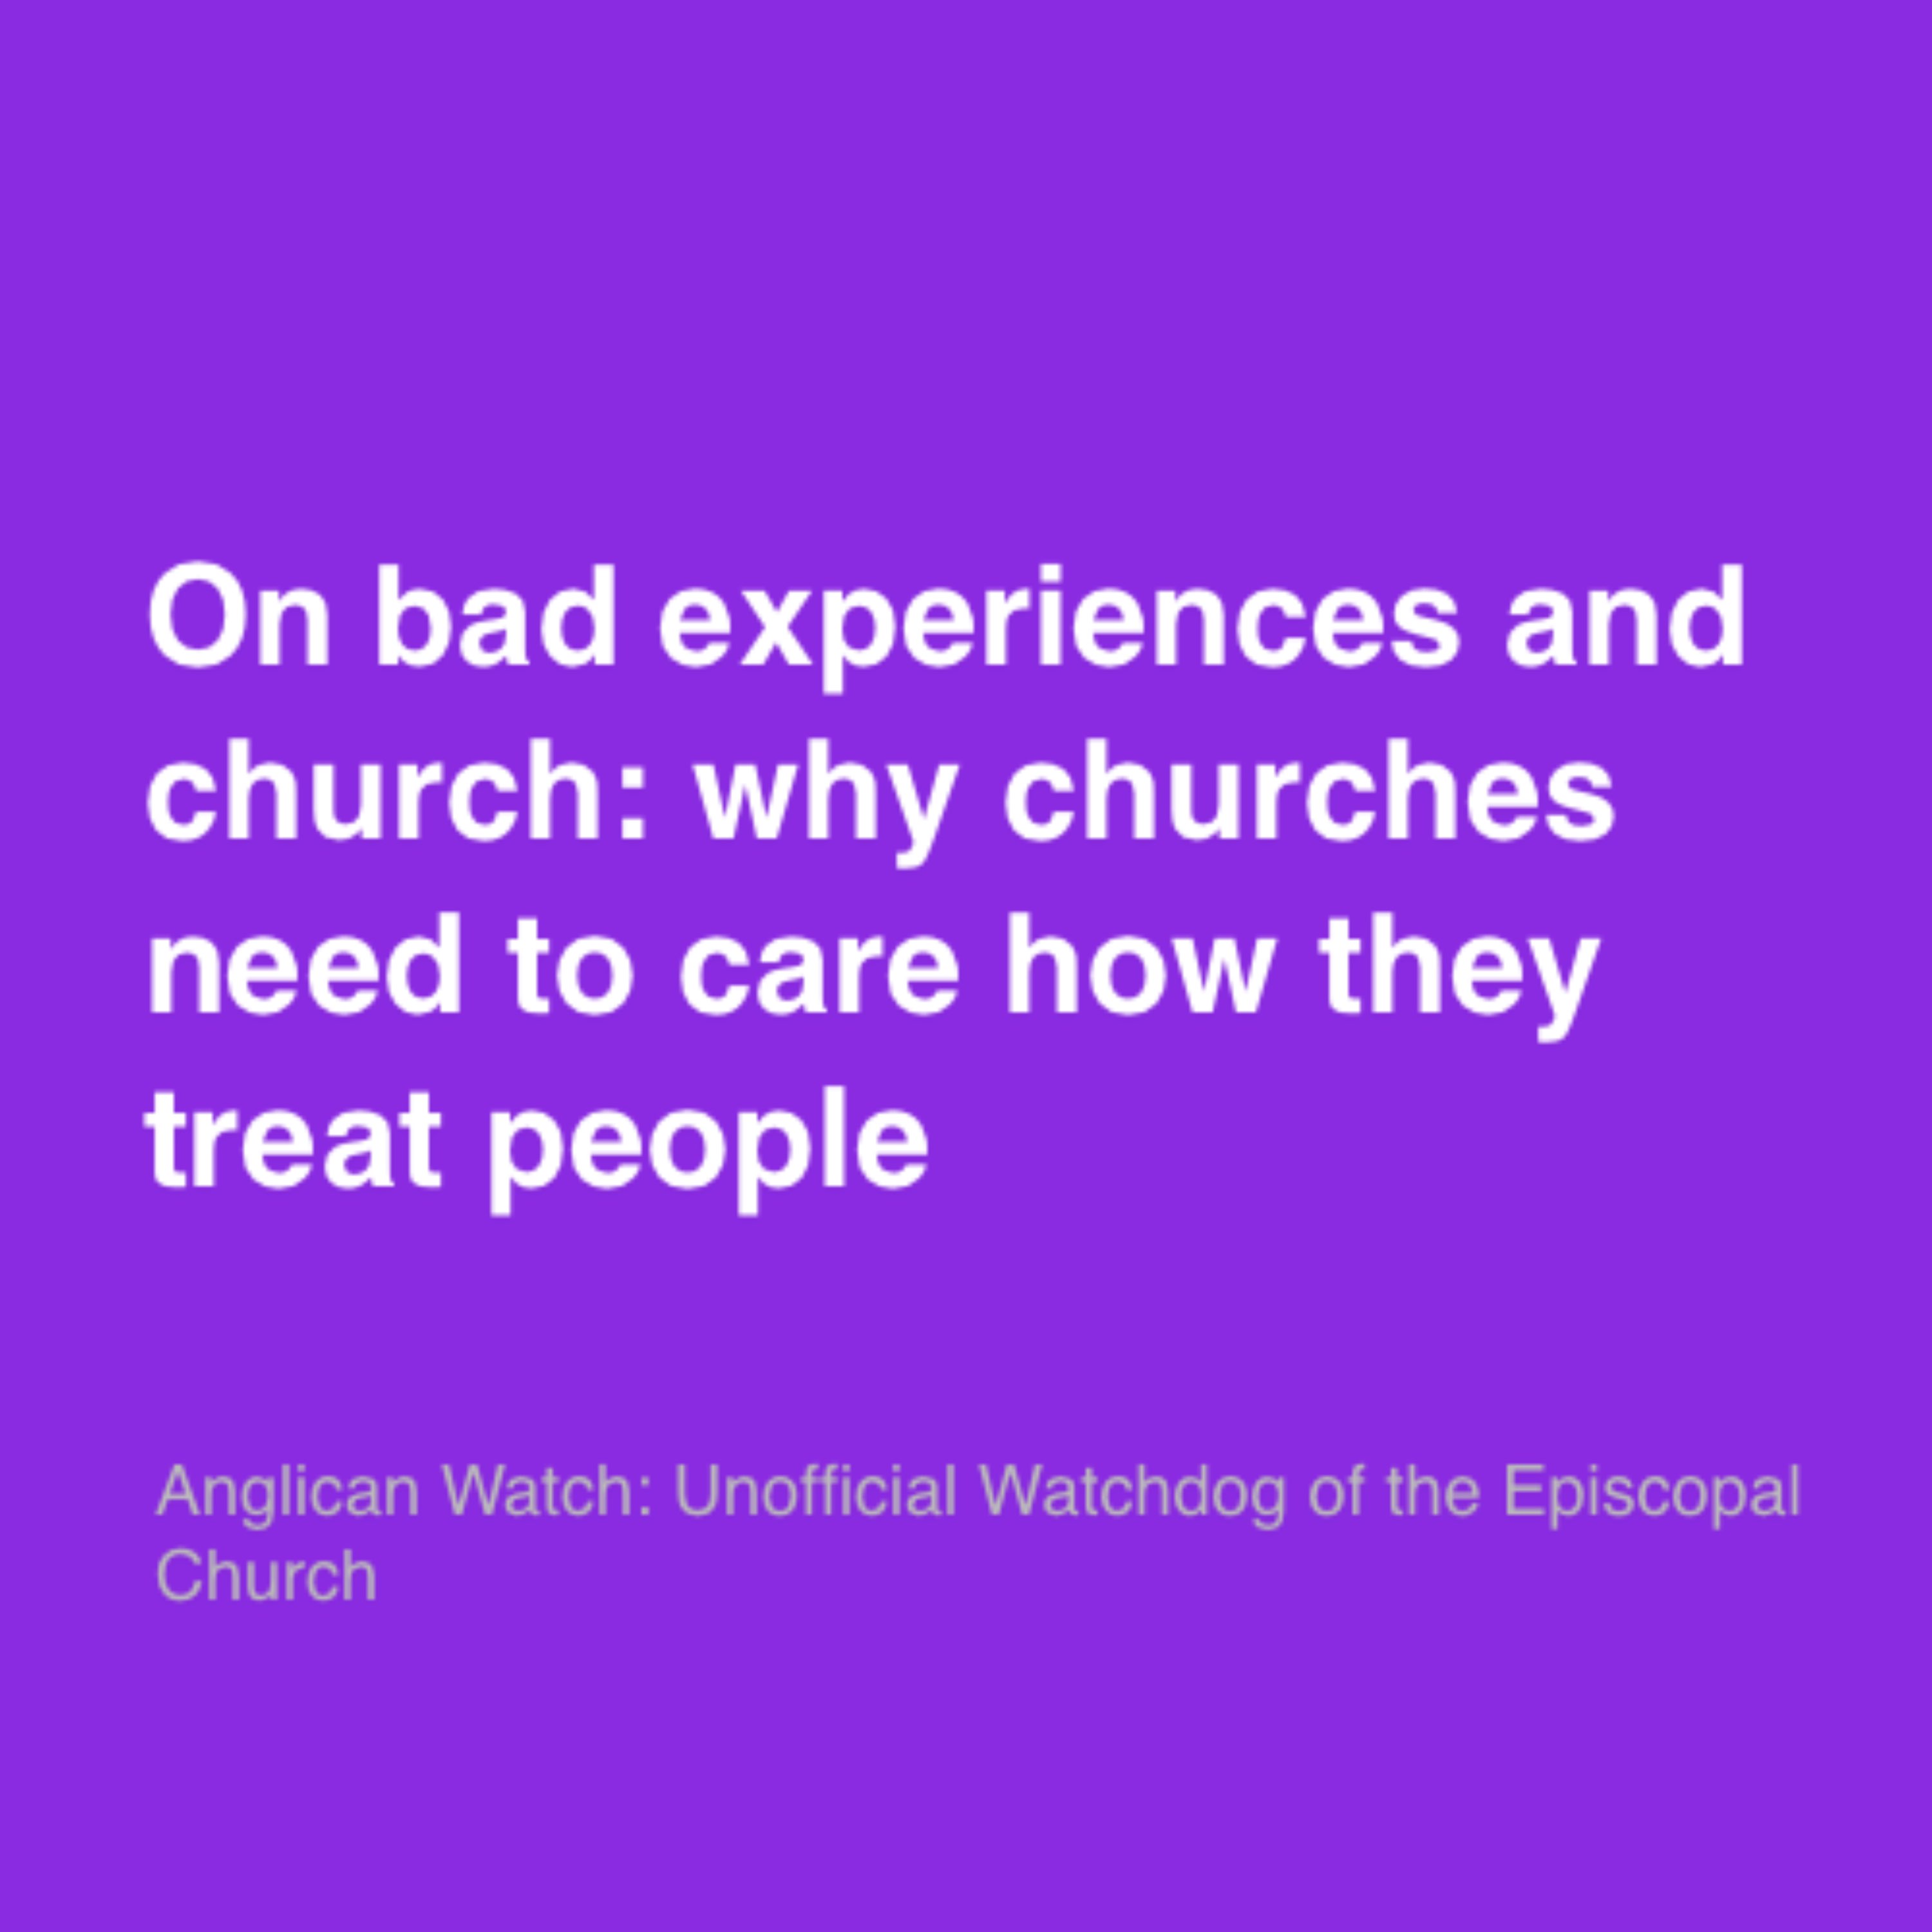 On bad experiences and church: why churches need to care how they treat people